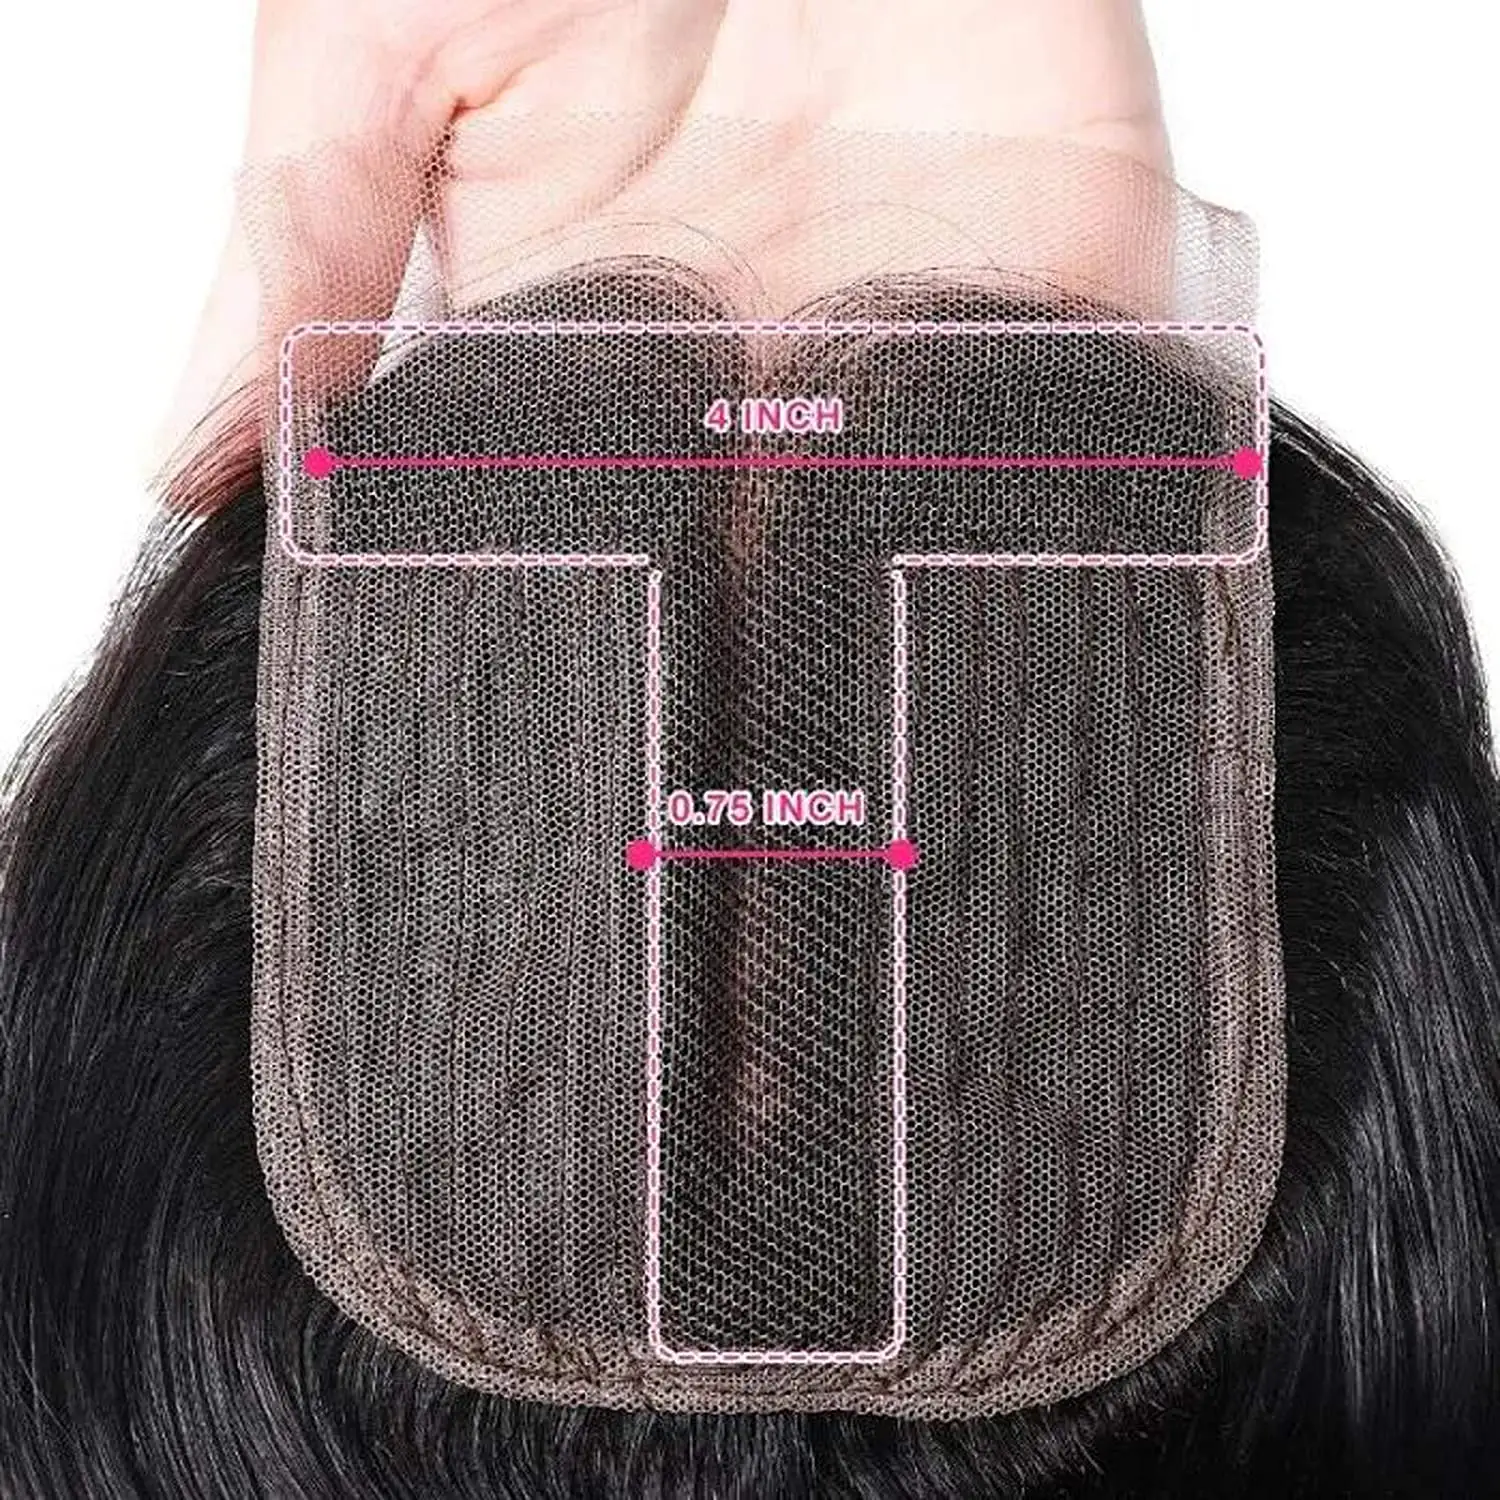 Wholesale Cheap Price 4*4*1 T part Human Hair Closure Body Wave Front Closure Natural Black High quality